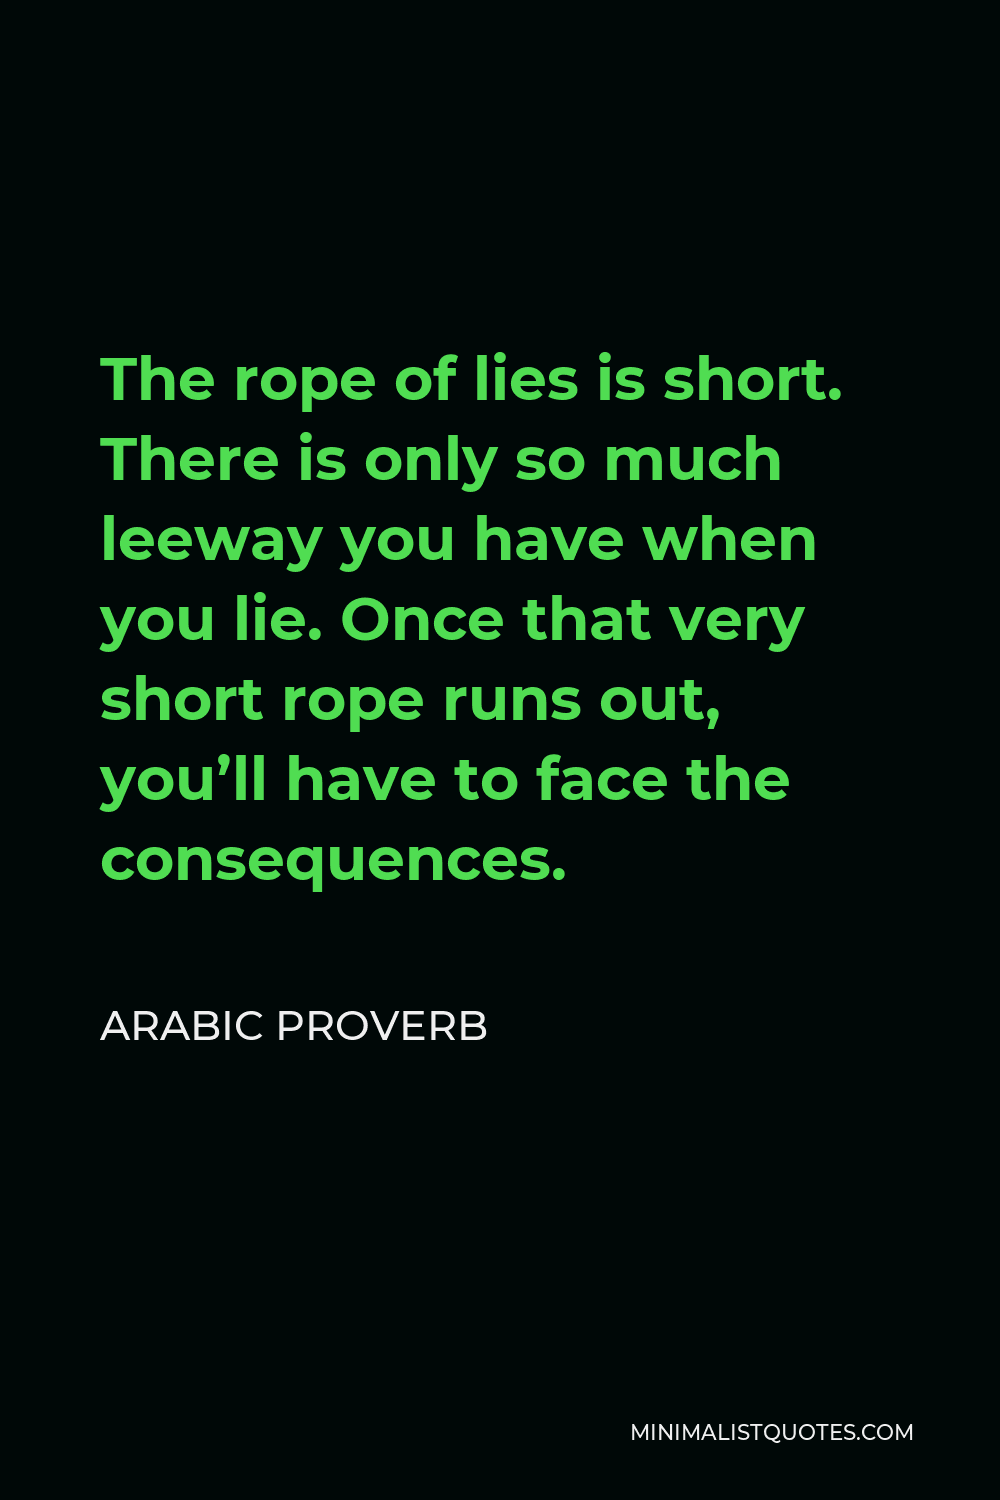 Arabic Proverb Quote - The rope of lies is short. There is only so much leeway you have when you lie. Once that very short rope runs out, you’ll have to face the consequences.